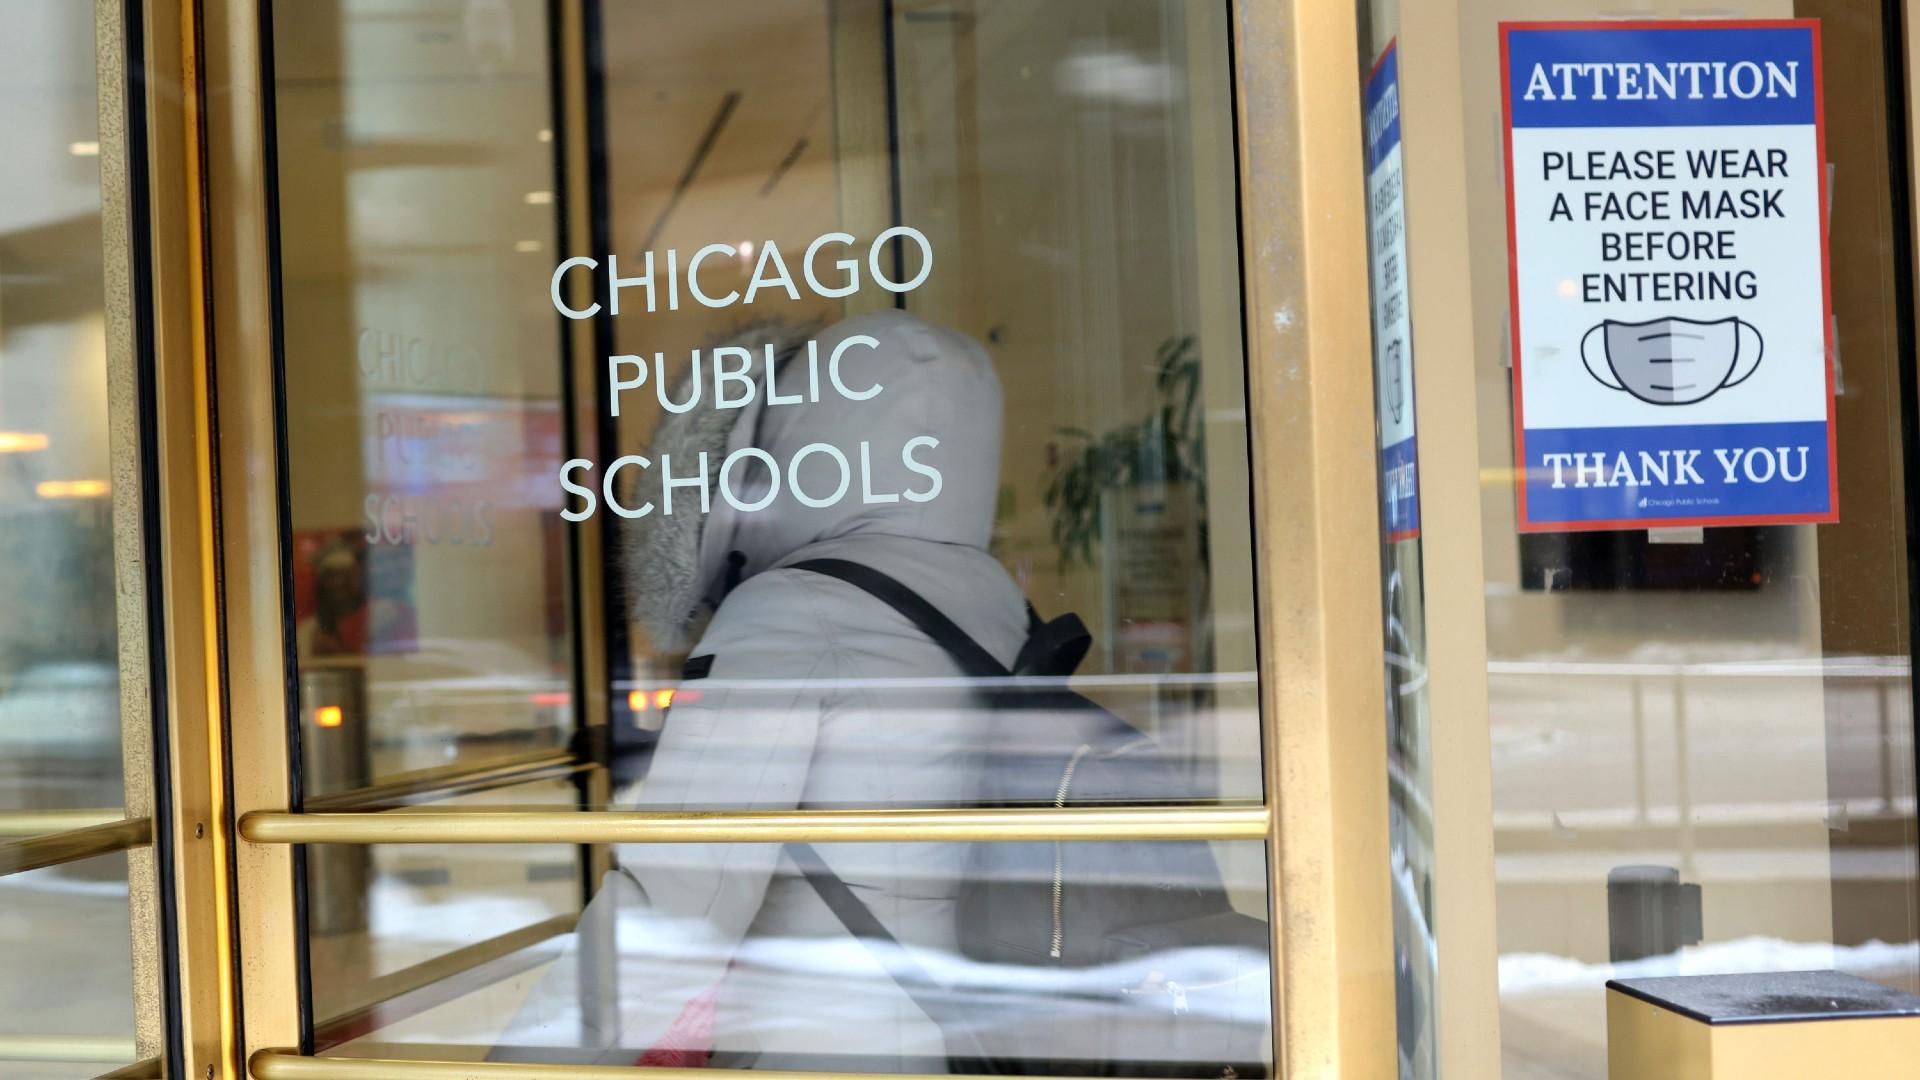 Chicago public schools are closed for a second day as city school officials and the teachers union remain at odds over whether it’s safe to return to the classroom, and pictured, a sign is displayed at the entrance of the headquarters for Chicago Public Schools on Jan. 5, in Chicago, Illinois. (Scott Olson / Getty Images)